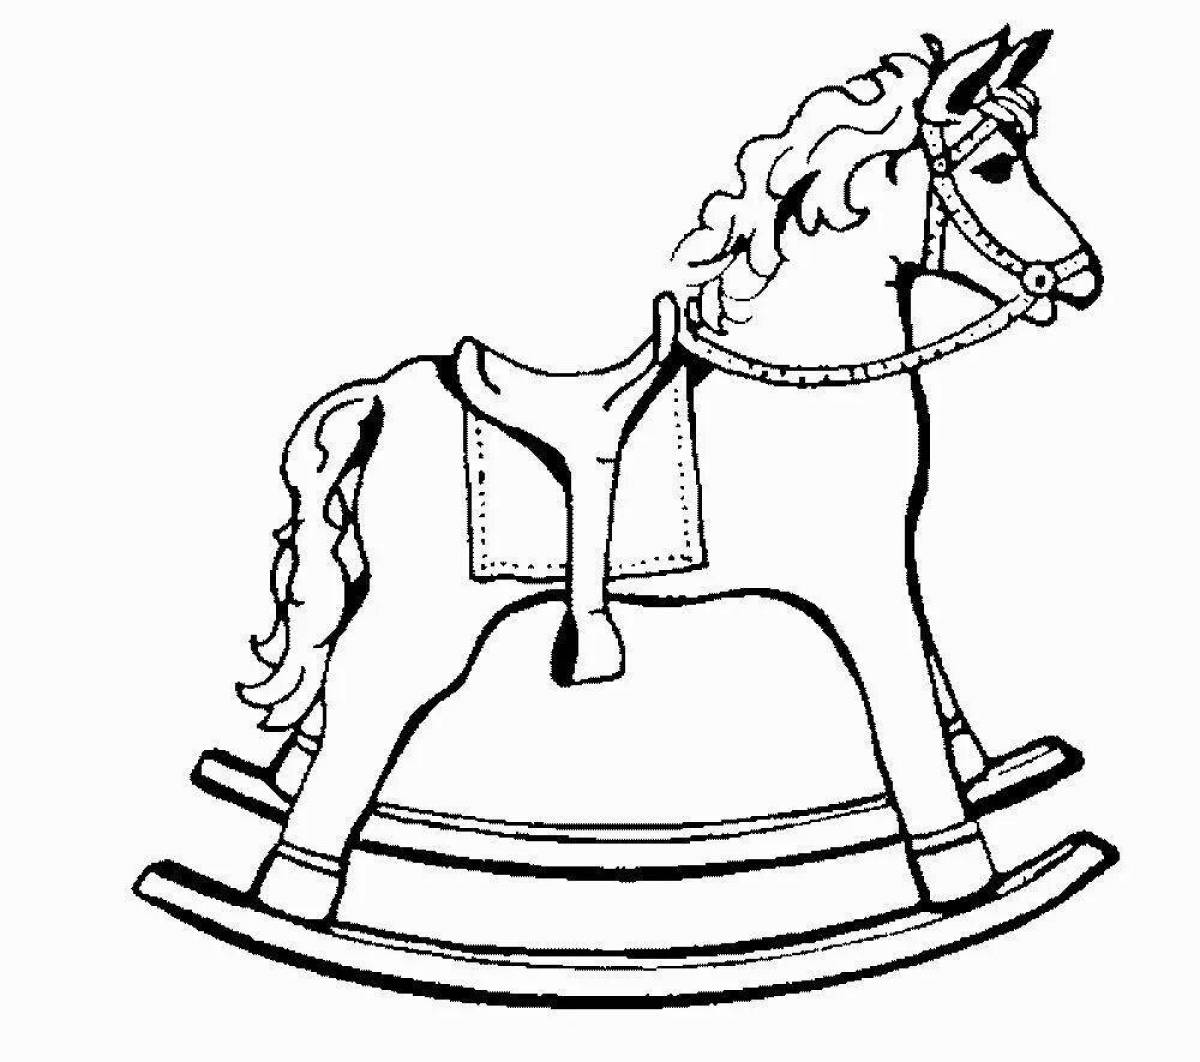 Colored explosive rocking horse coloring book